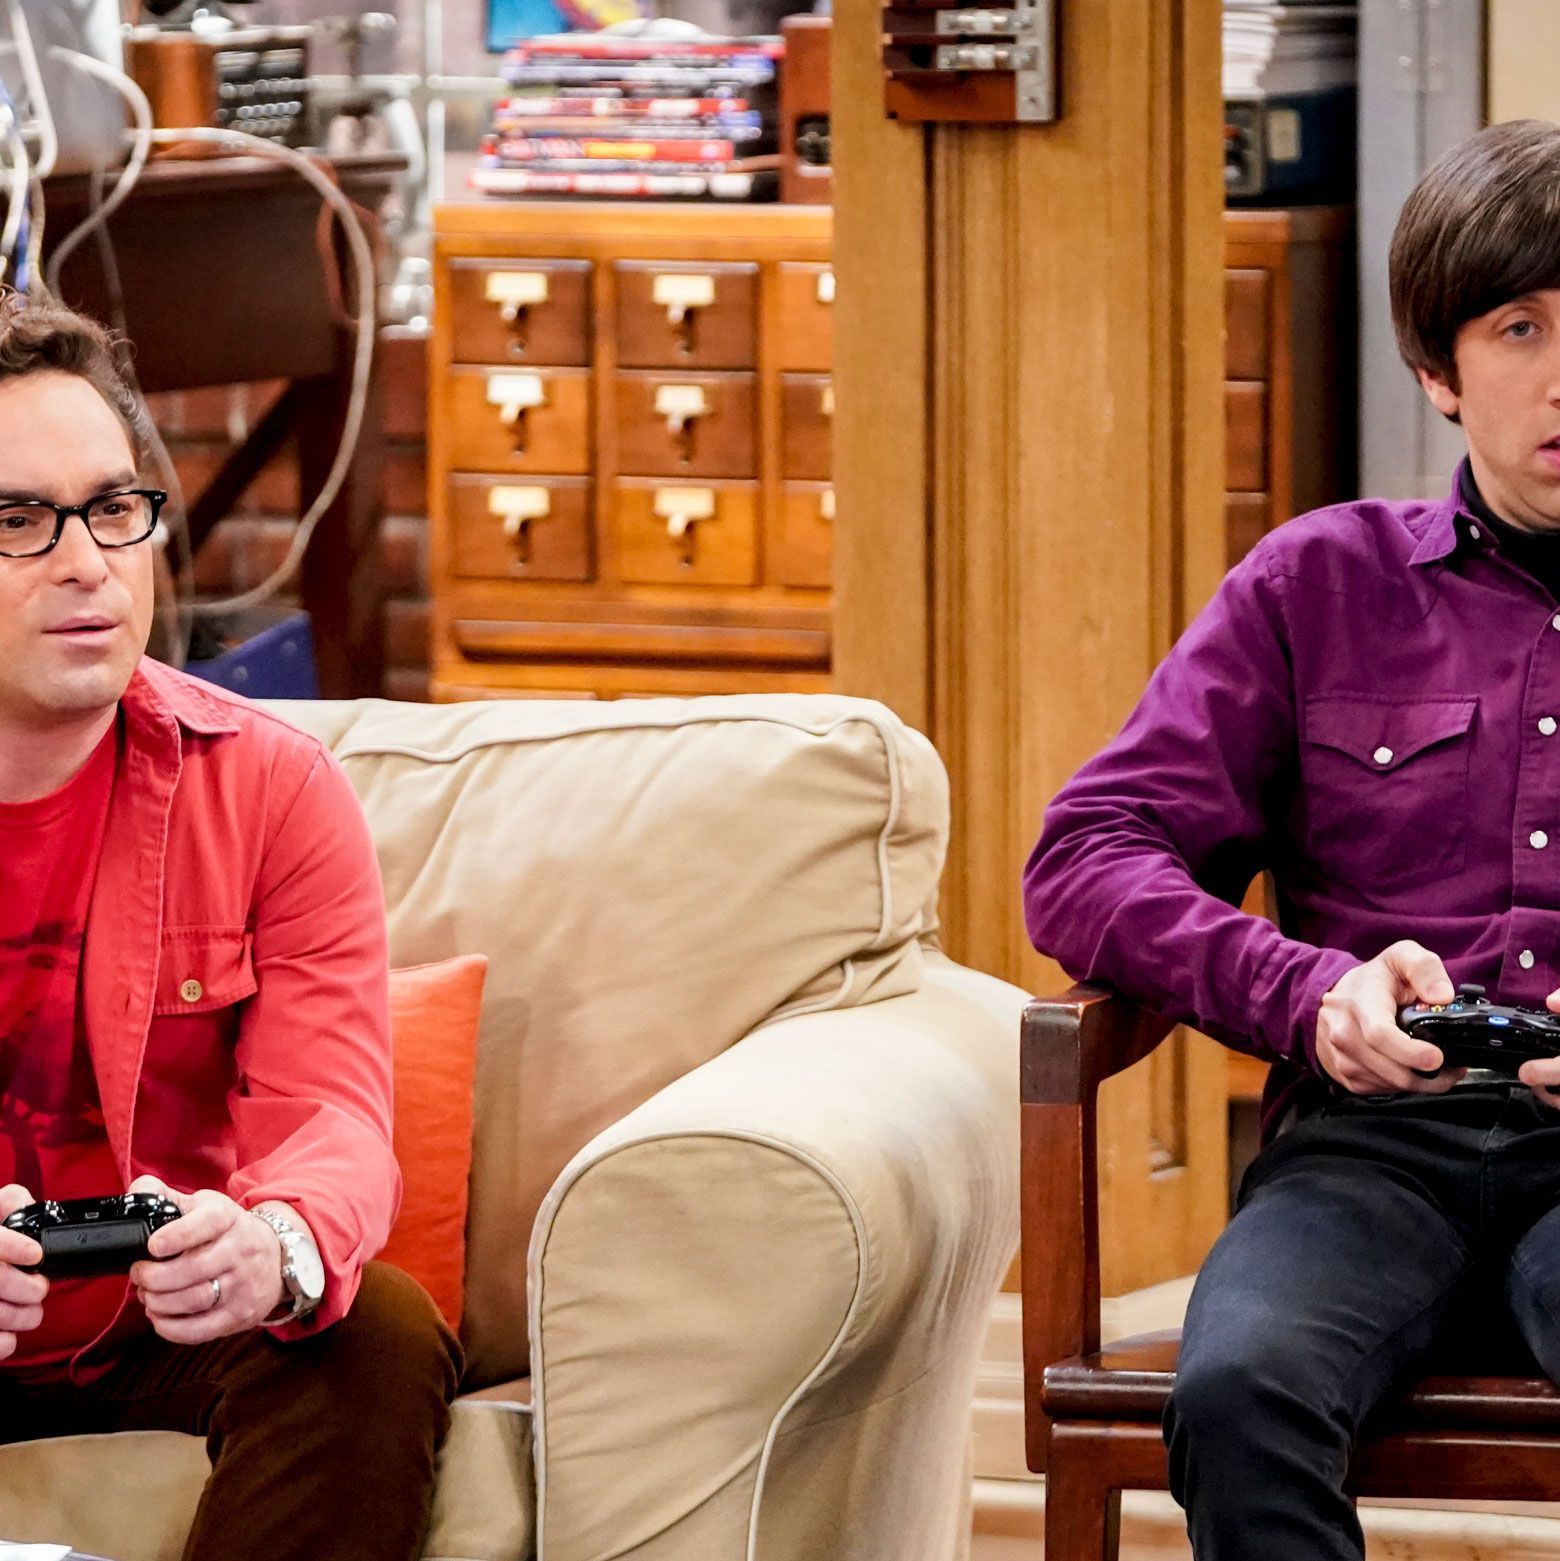 New 'Big Bang Theory' spinoff in development - Good Morning America